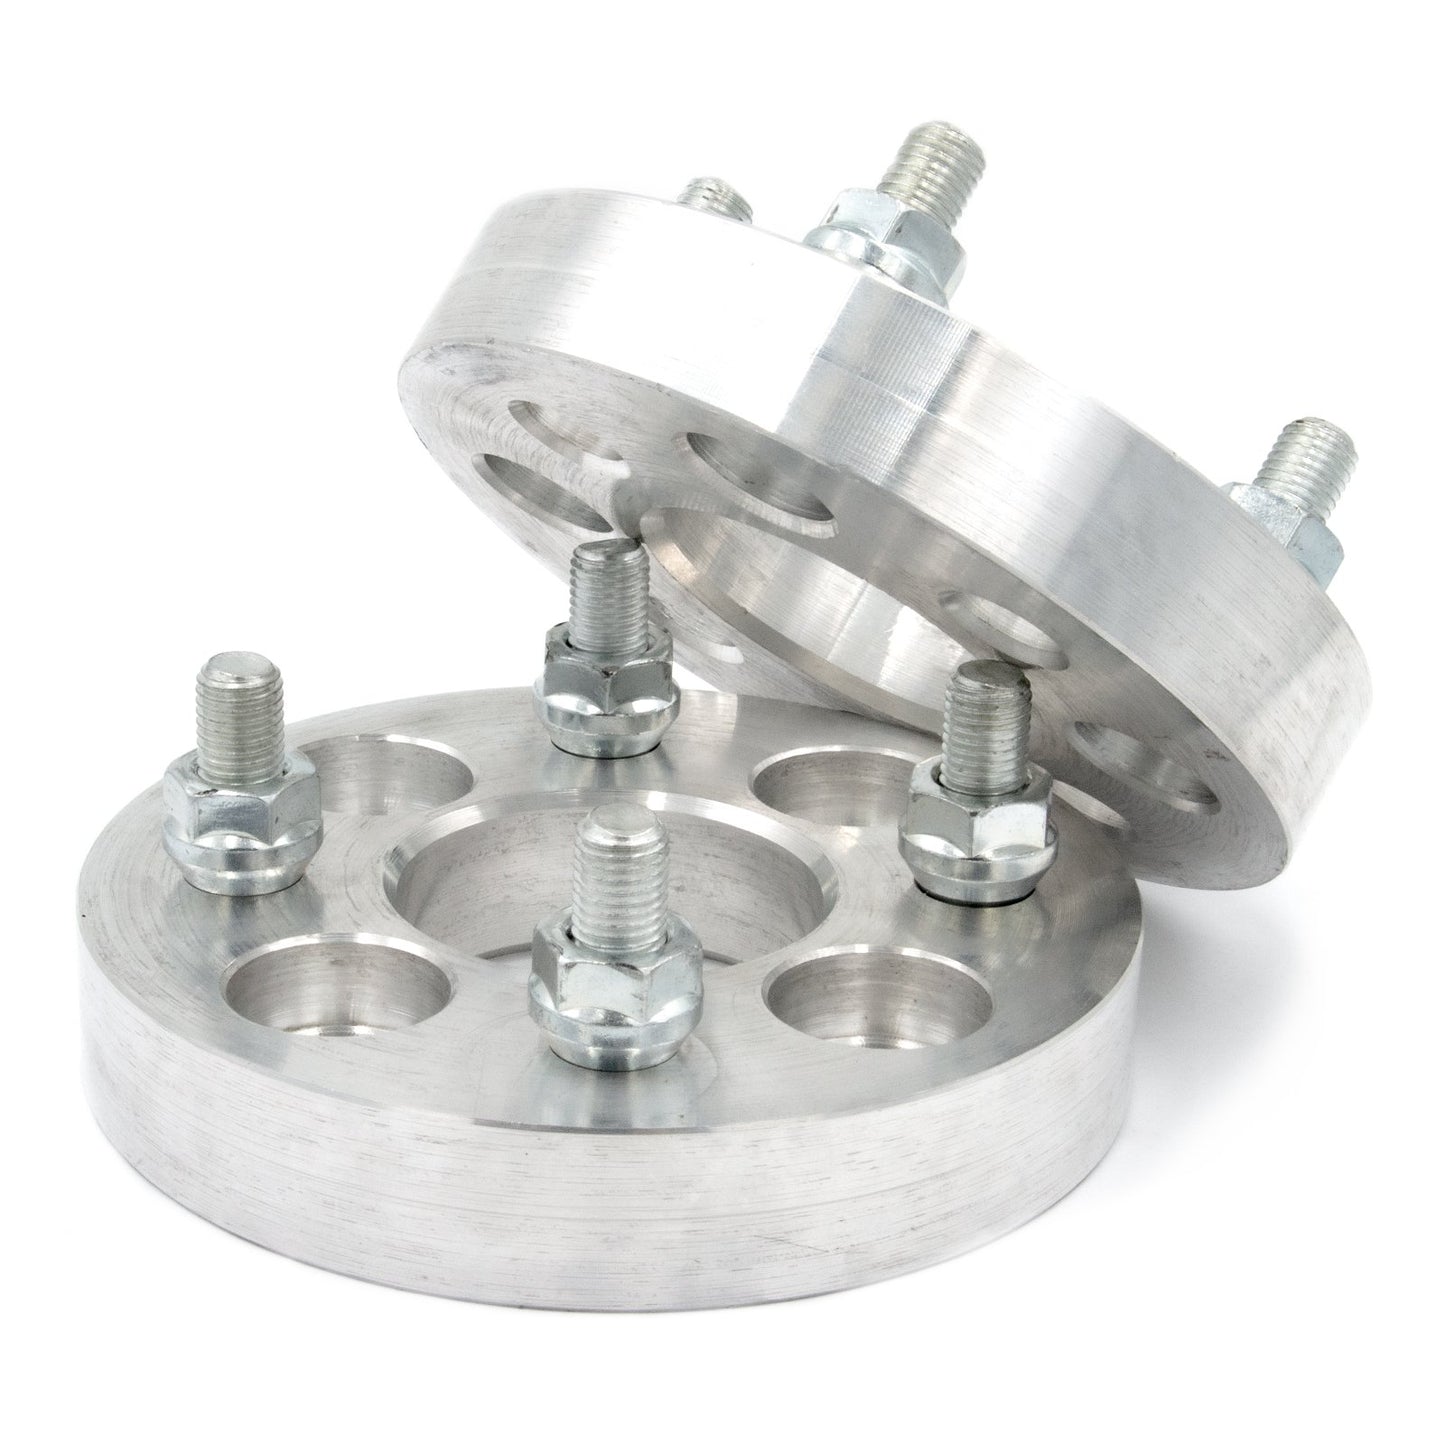 4x144 to 4x136 Wheel Spacer/Adapter - Thickness: 3/4"- 4"